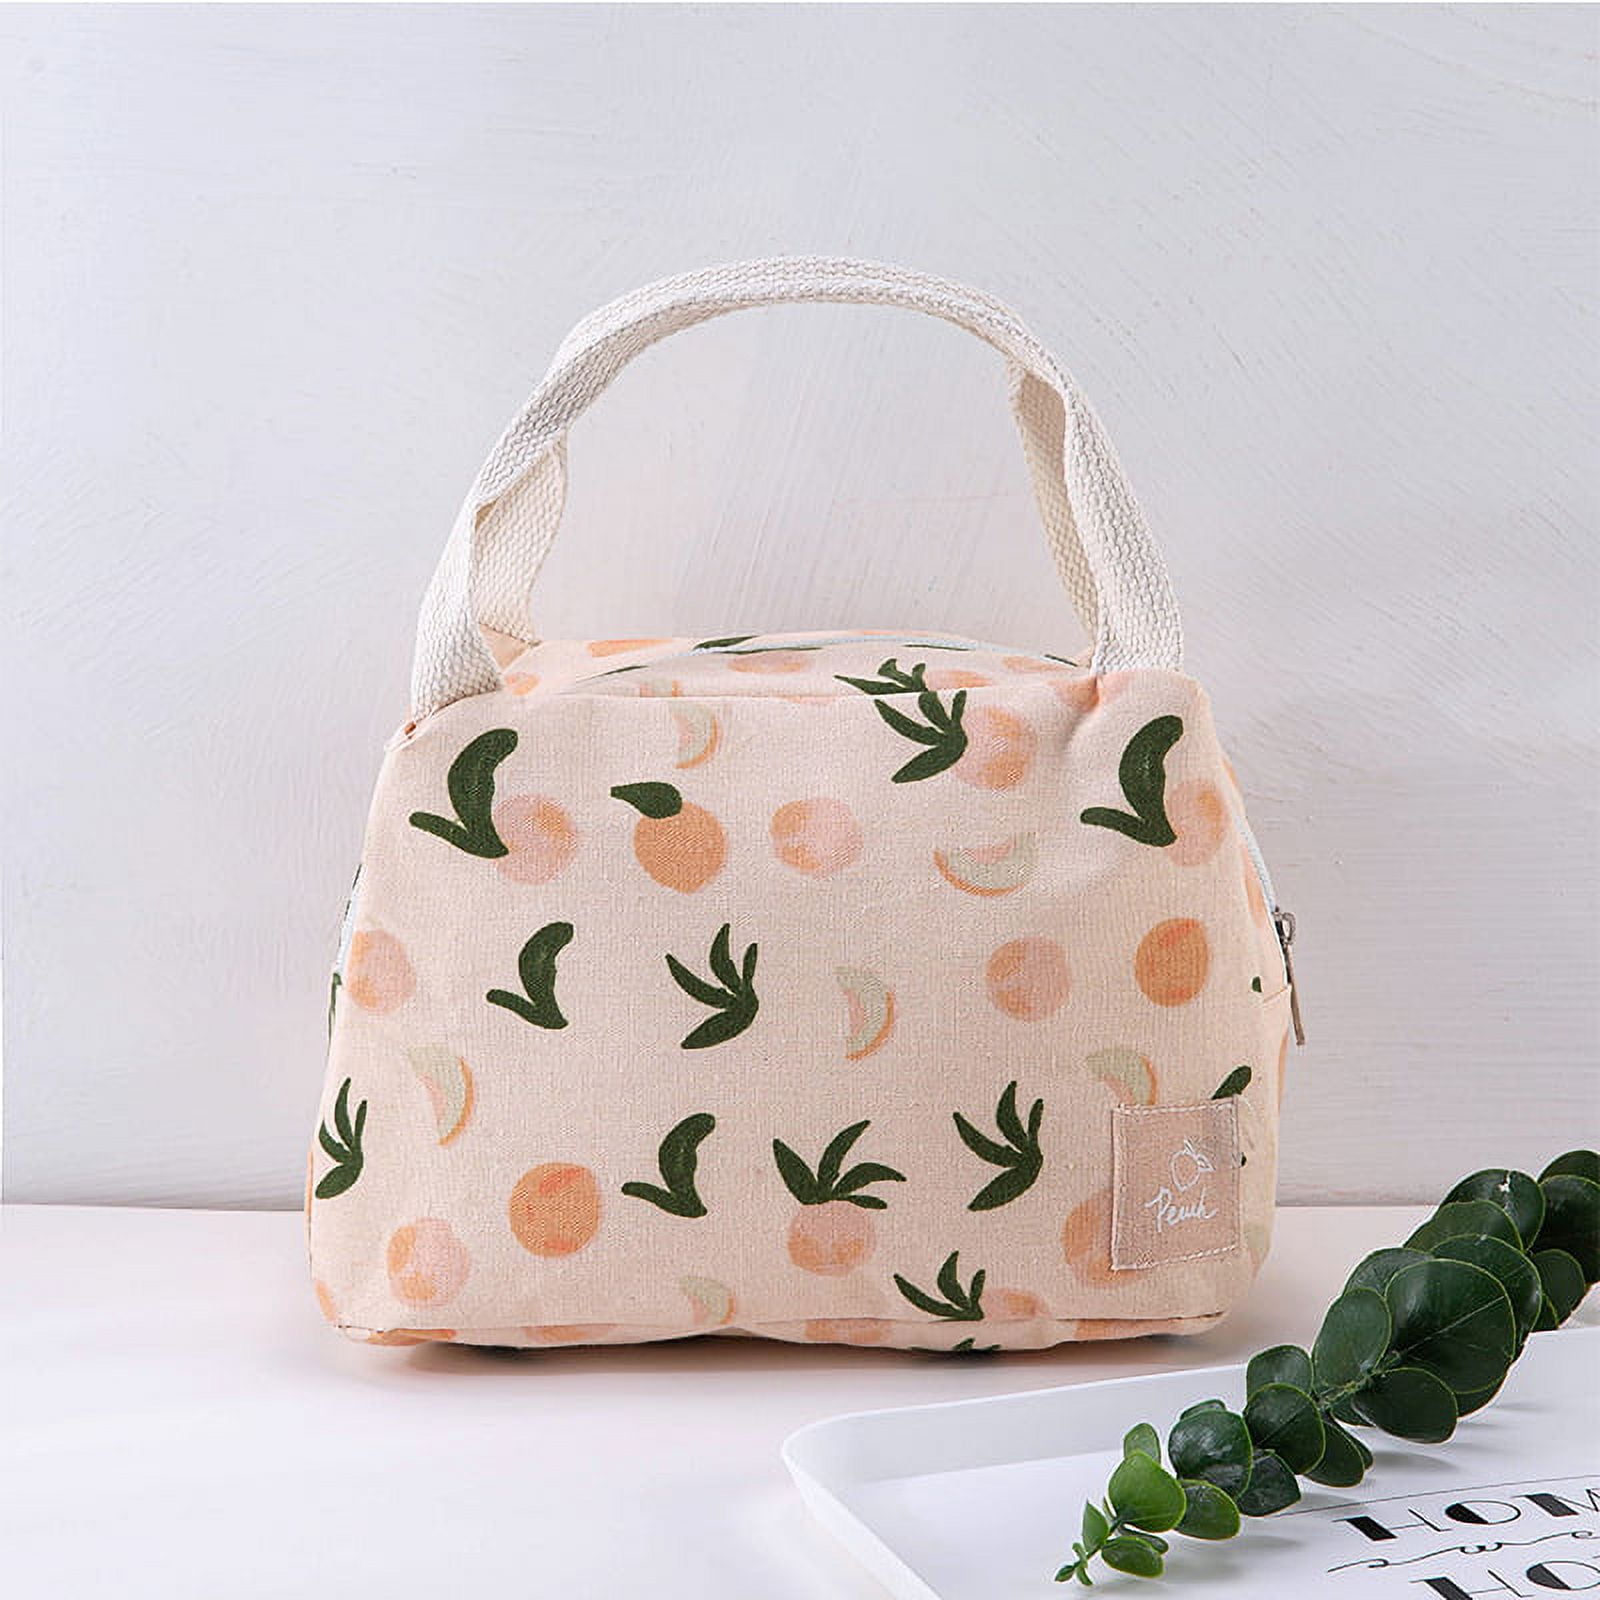 Lunch Bag, GMYLE Insulated Reusable Waterproof Lunch Tote for Women Men  Kids, Peach 